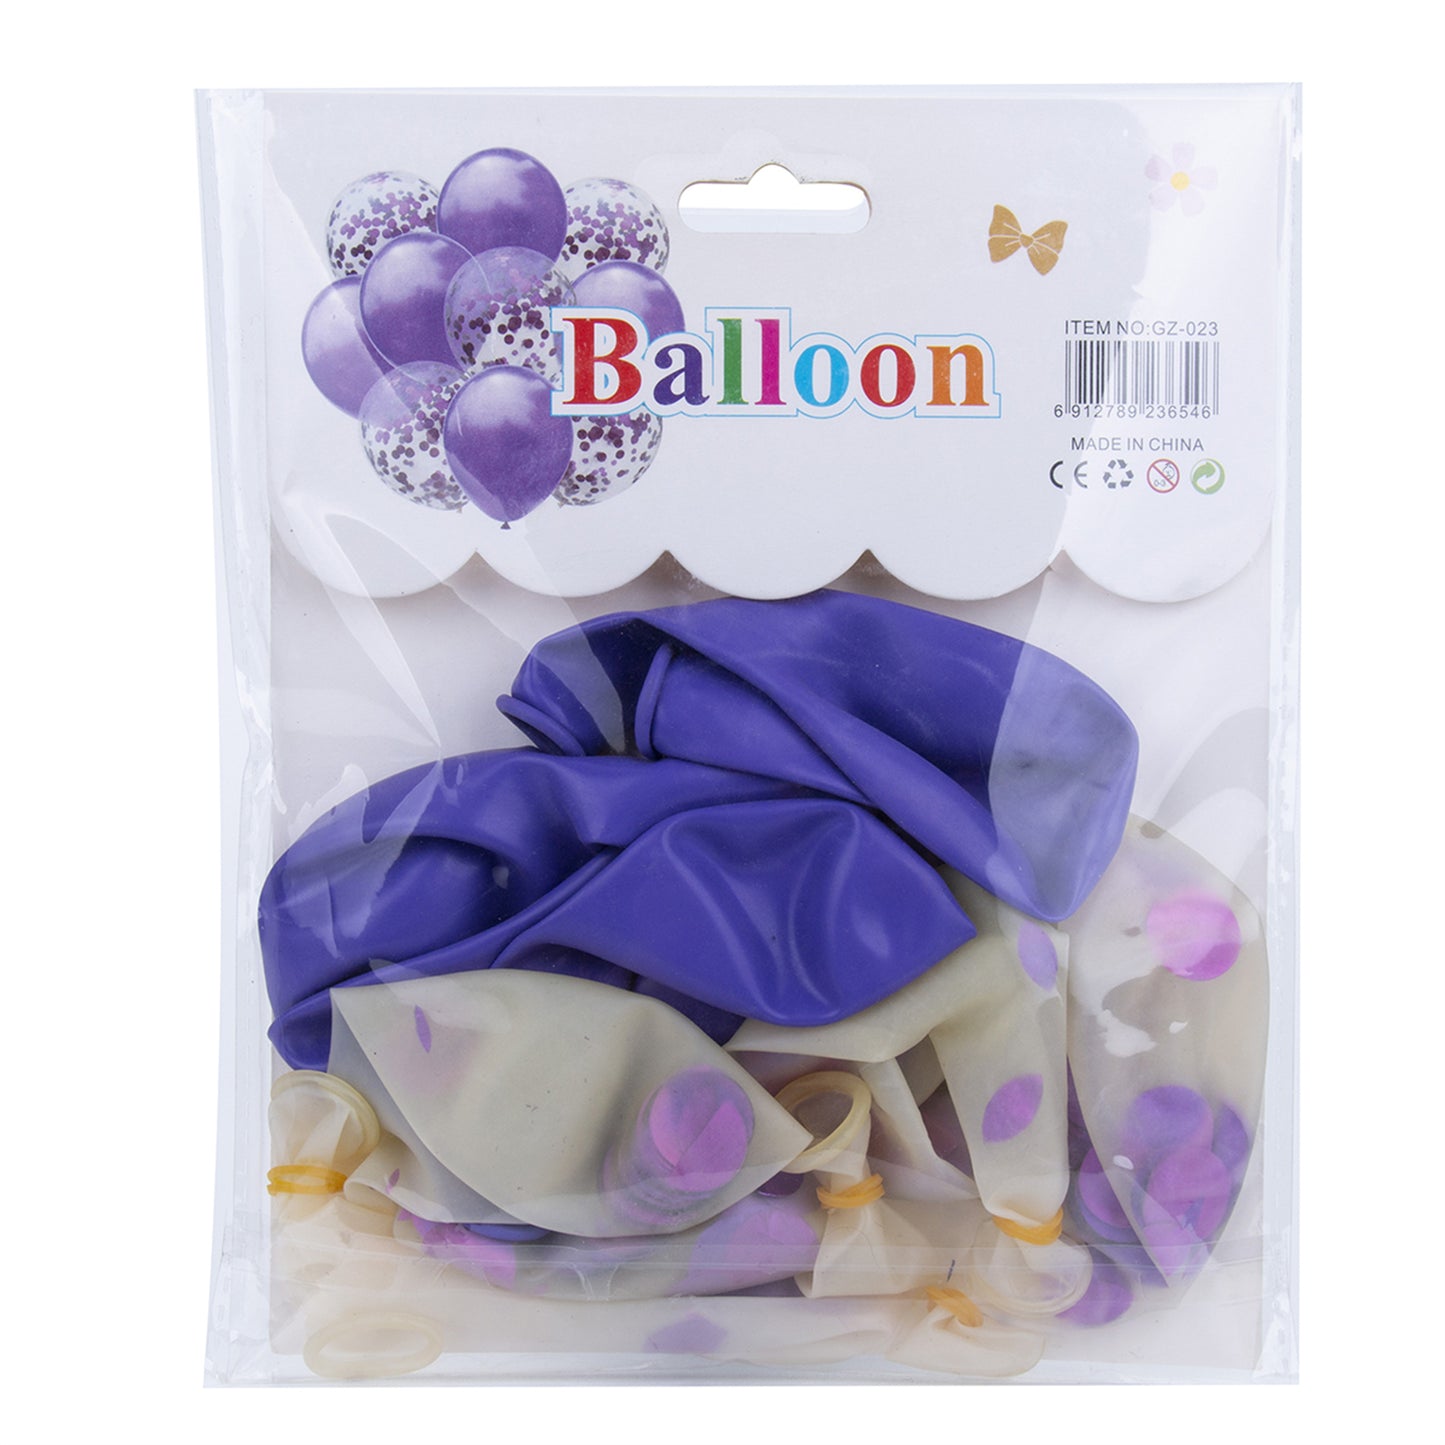 Party balloon baby birthday,proposal for marriage